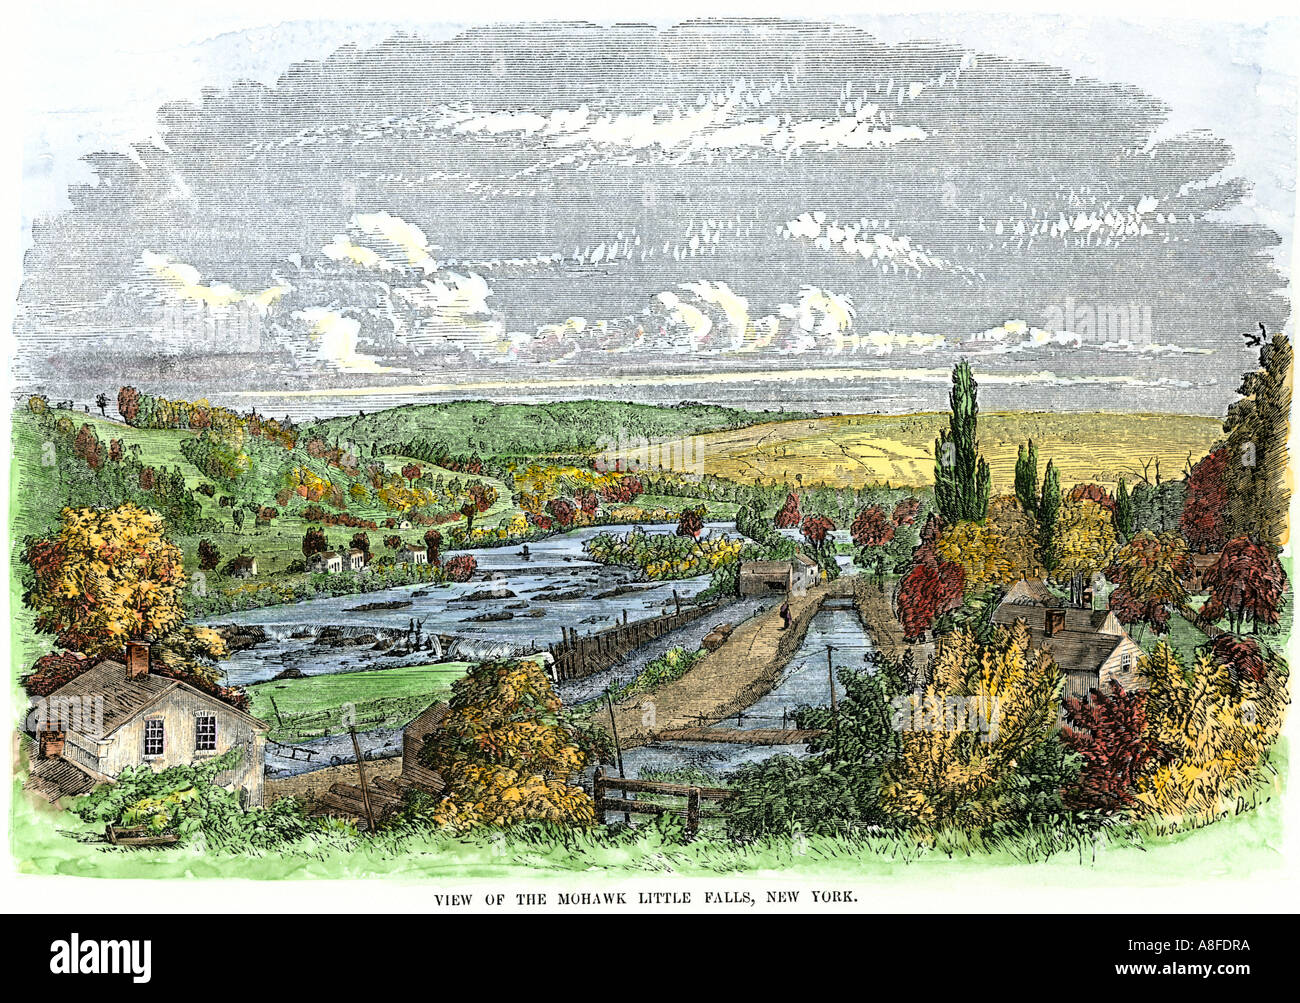 Little Falls New York in the Mohawk Valley 1850s. Hand-colored woodcut Stock Photo